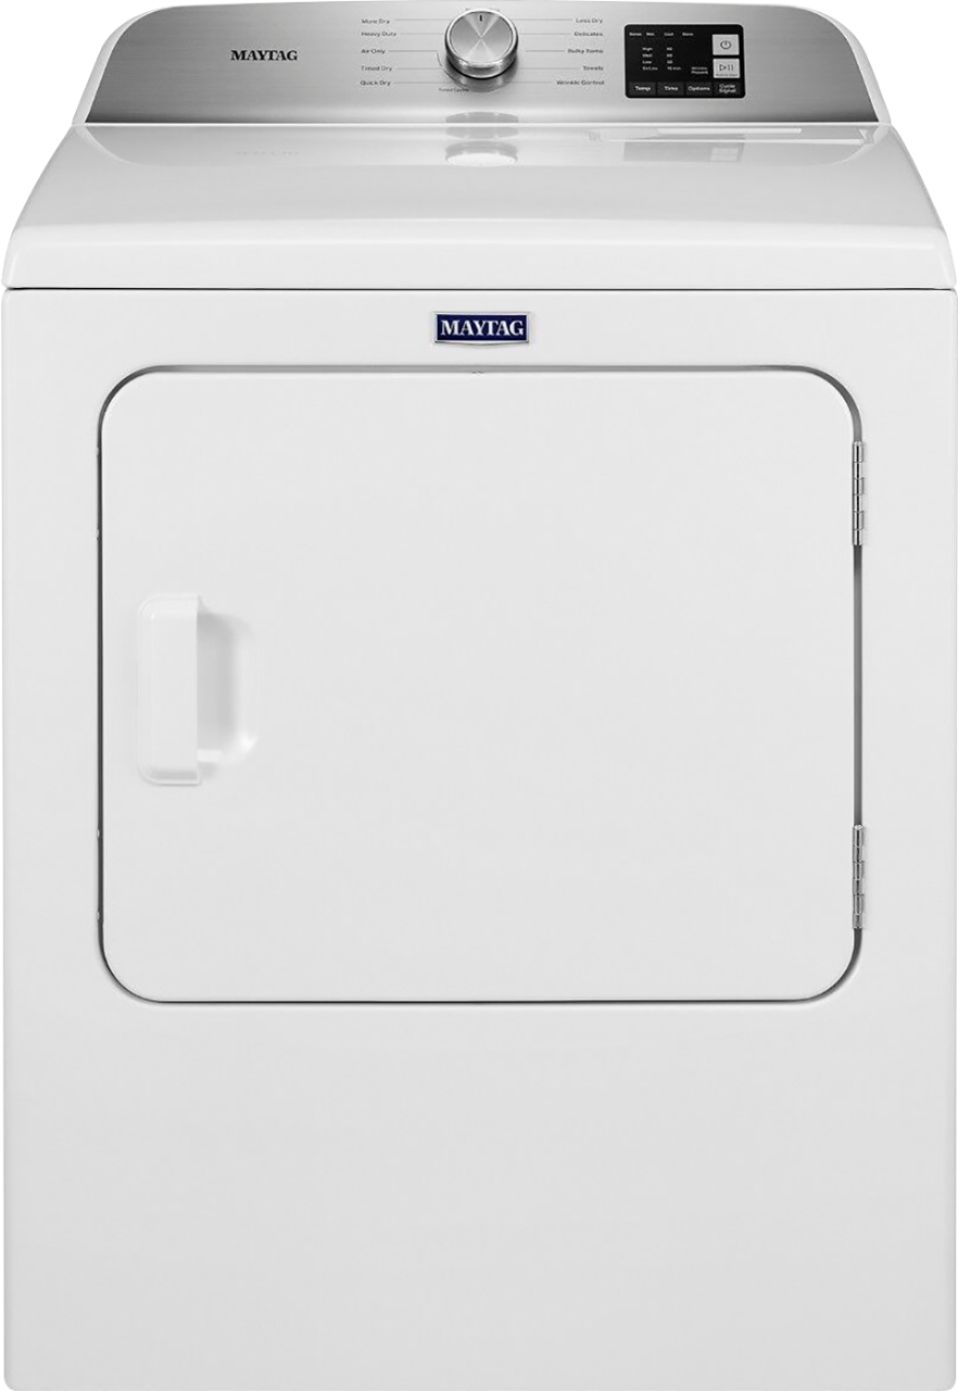 Maytag - 7.0 Cu. Ft. 11-Cycle Electric Dryer with Moisture Sensing - White